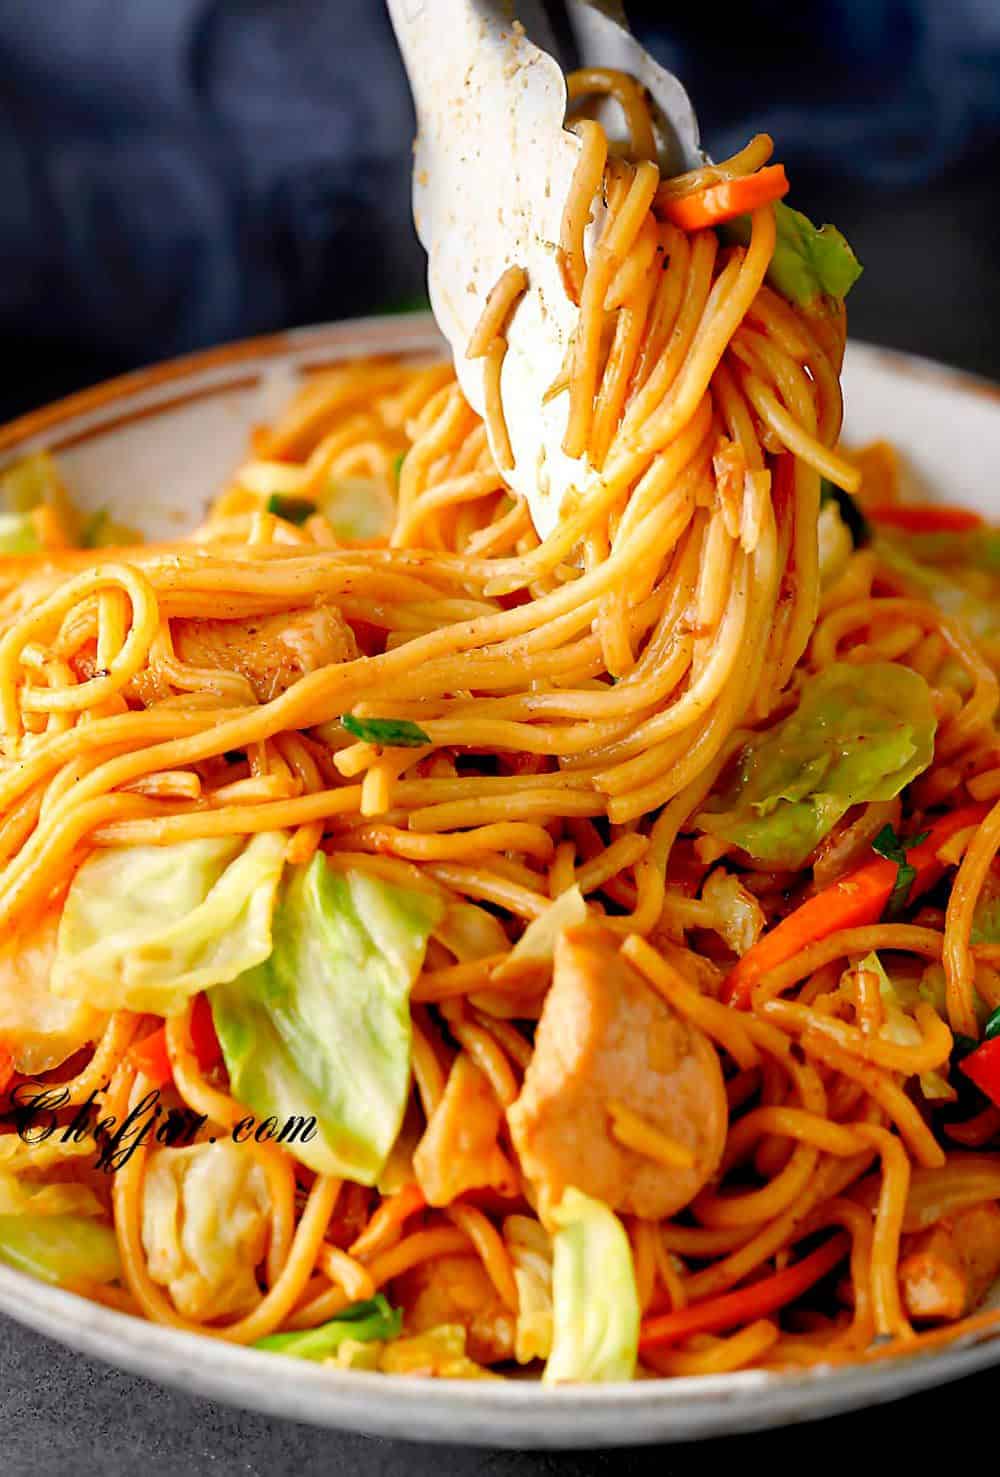 yakisoba noodles on the plate